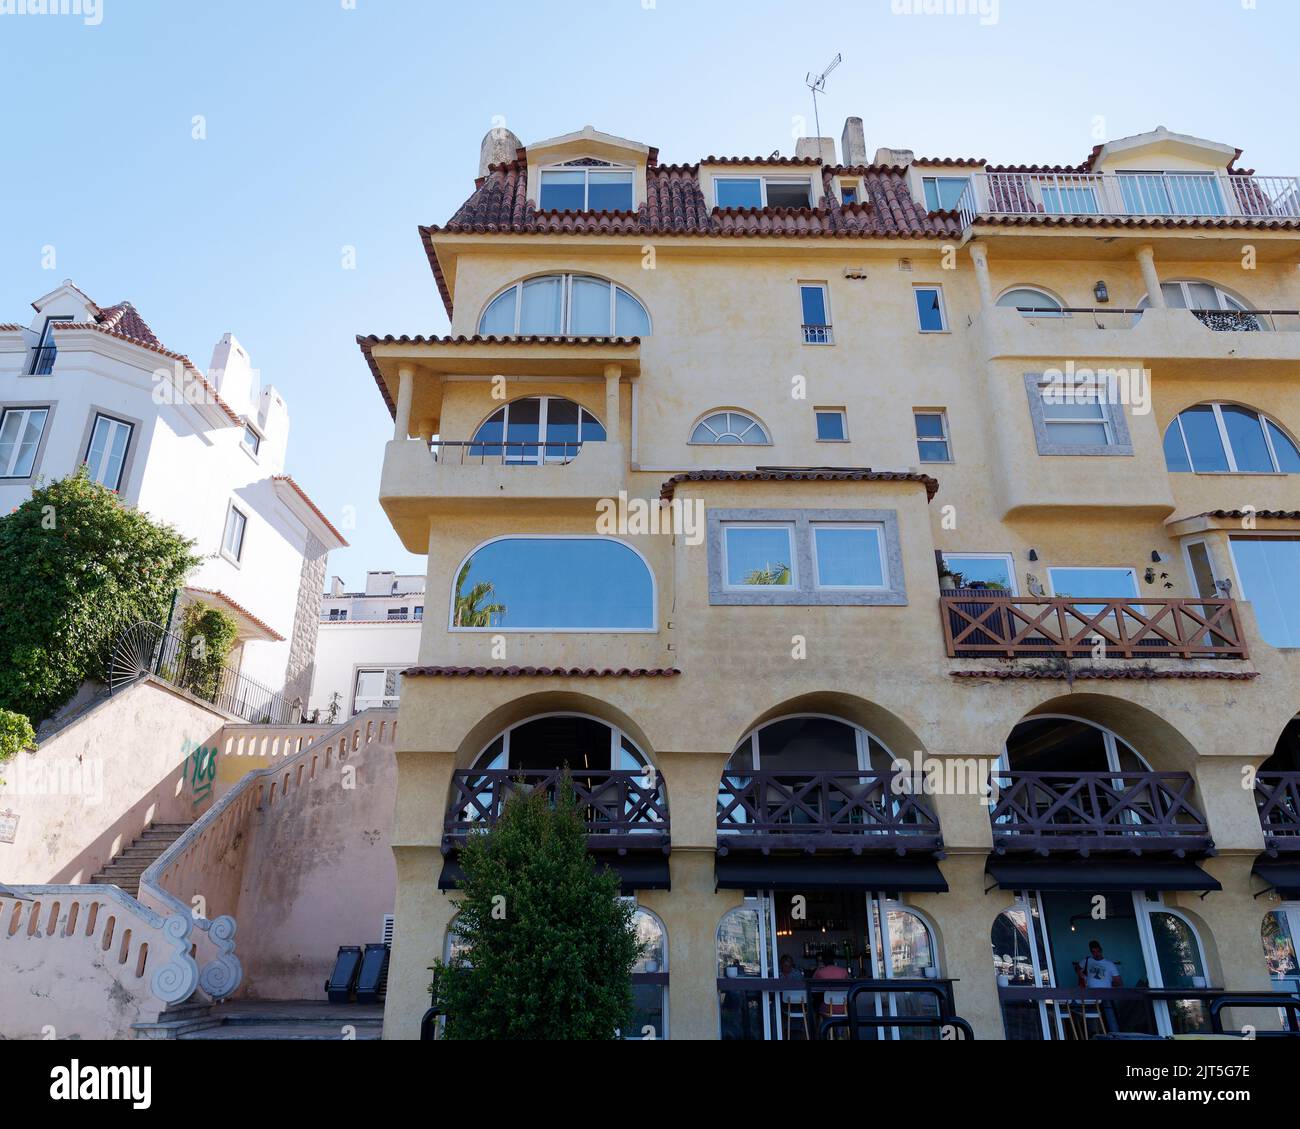 Yellow multi layered building with balconies in the town of Cascais, district of Lisbon, Portugal. Stock Photo